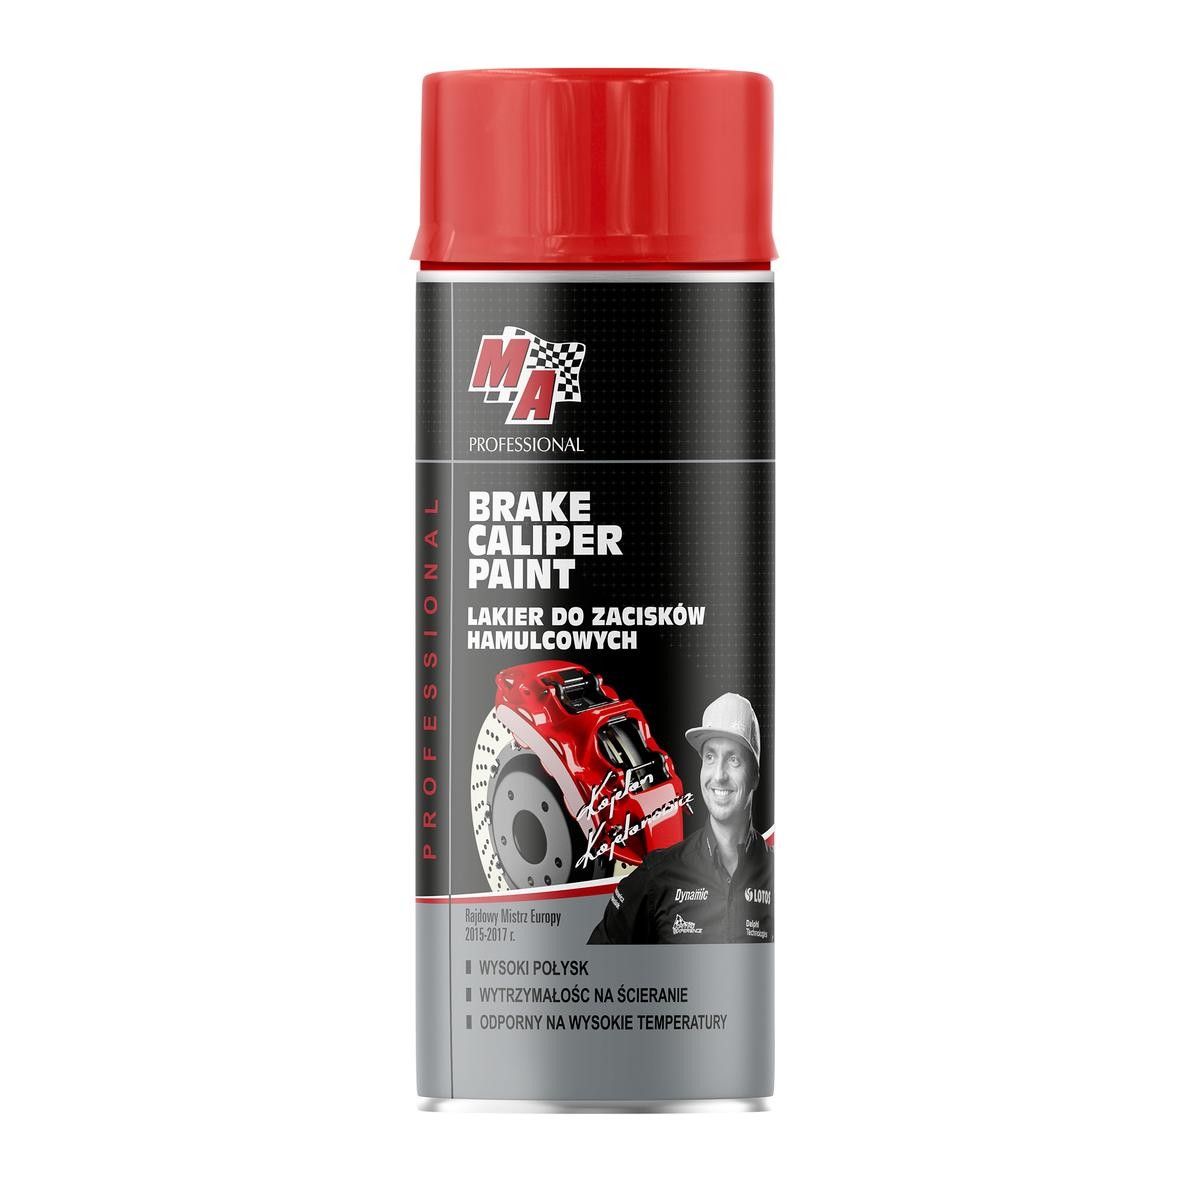 MA PROFESSIONAL 20B33 Paint for car brake calipers Red